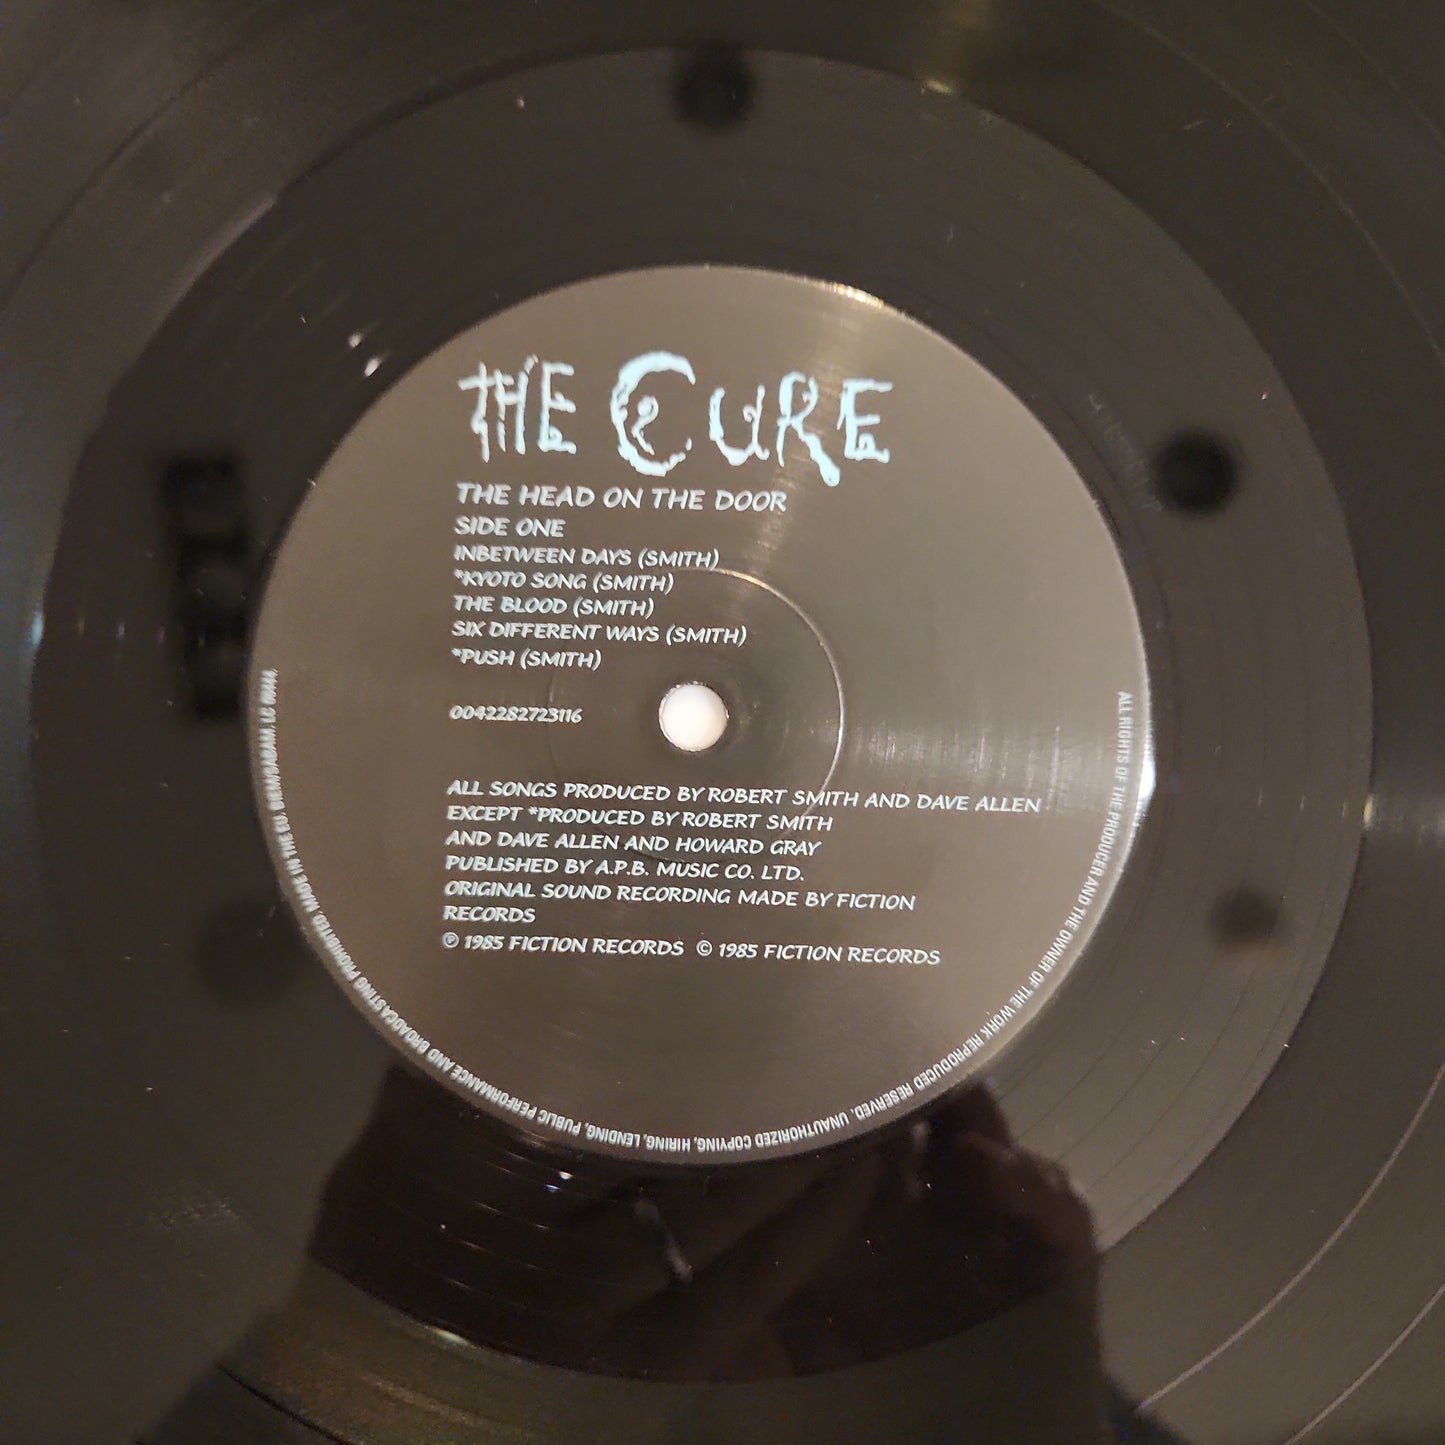 The CURE - THE HEAD ON THE DOOR (A83)